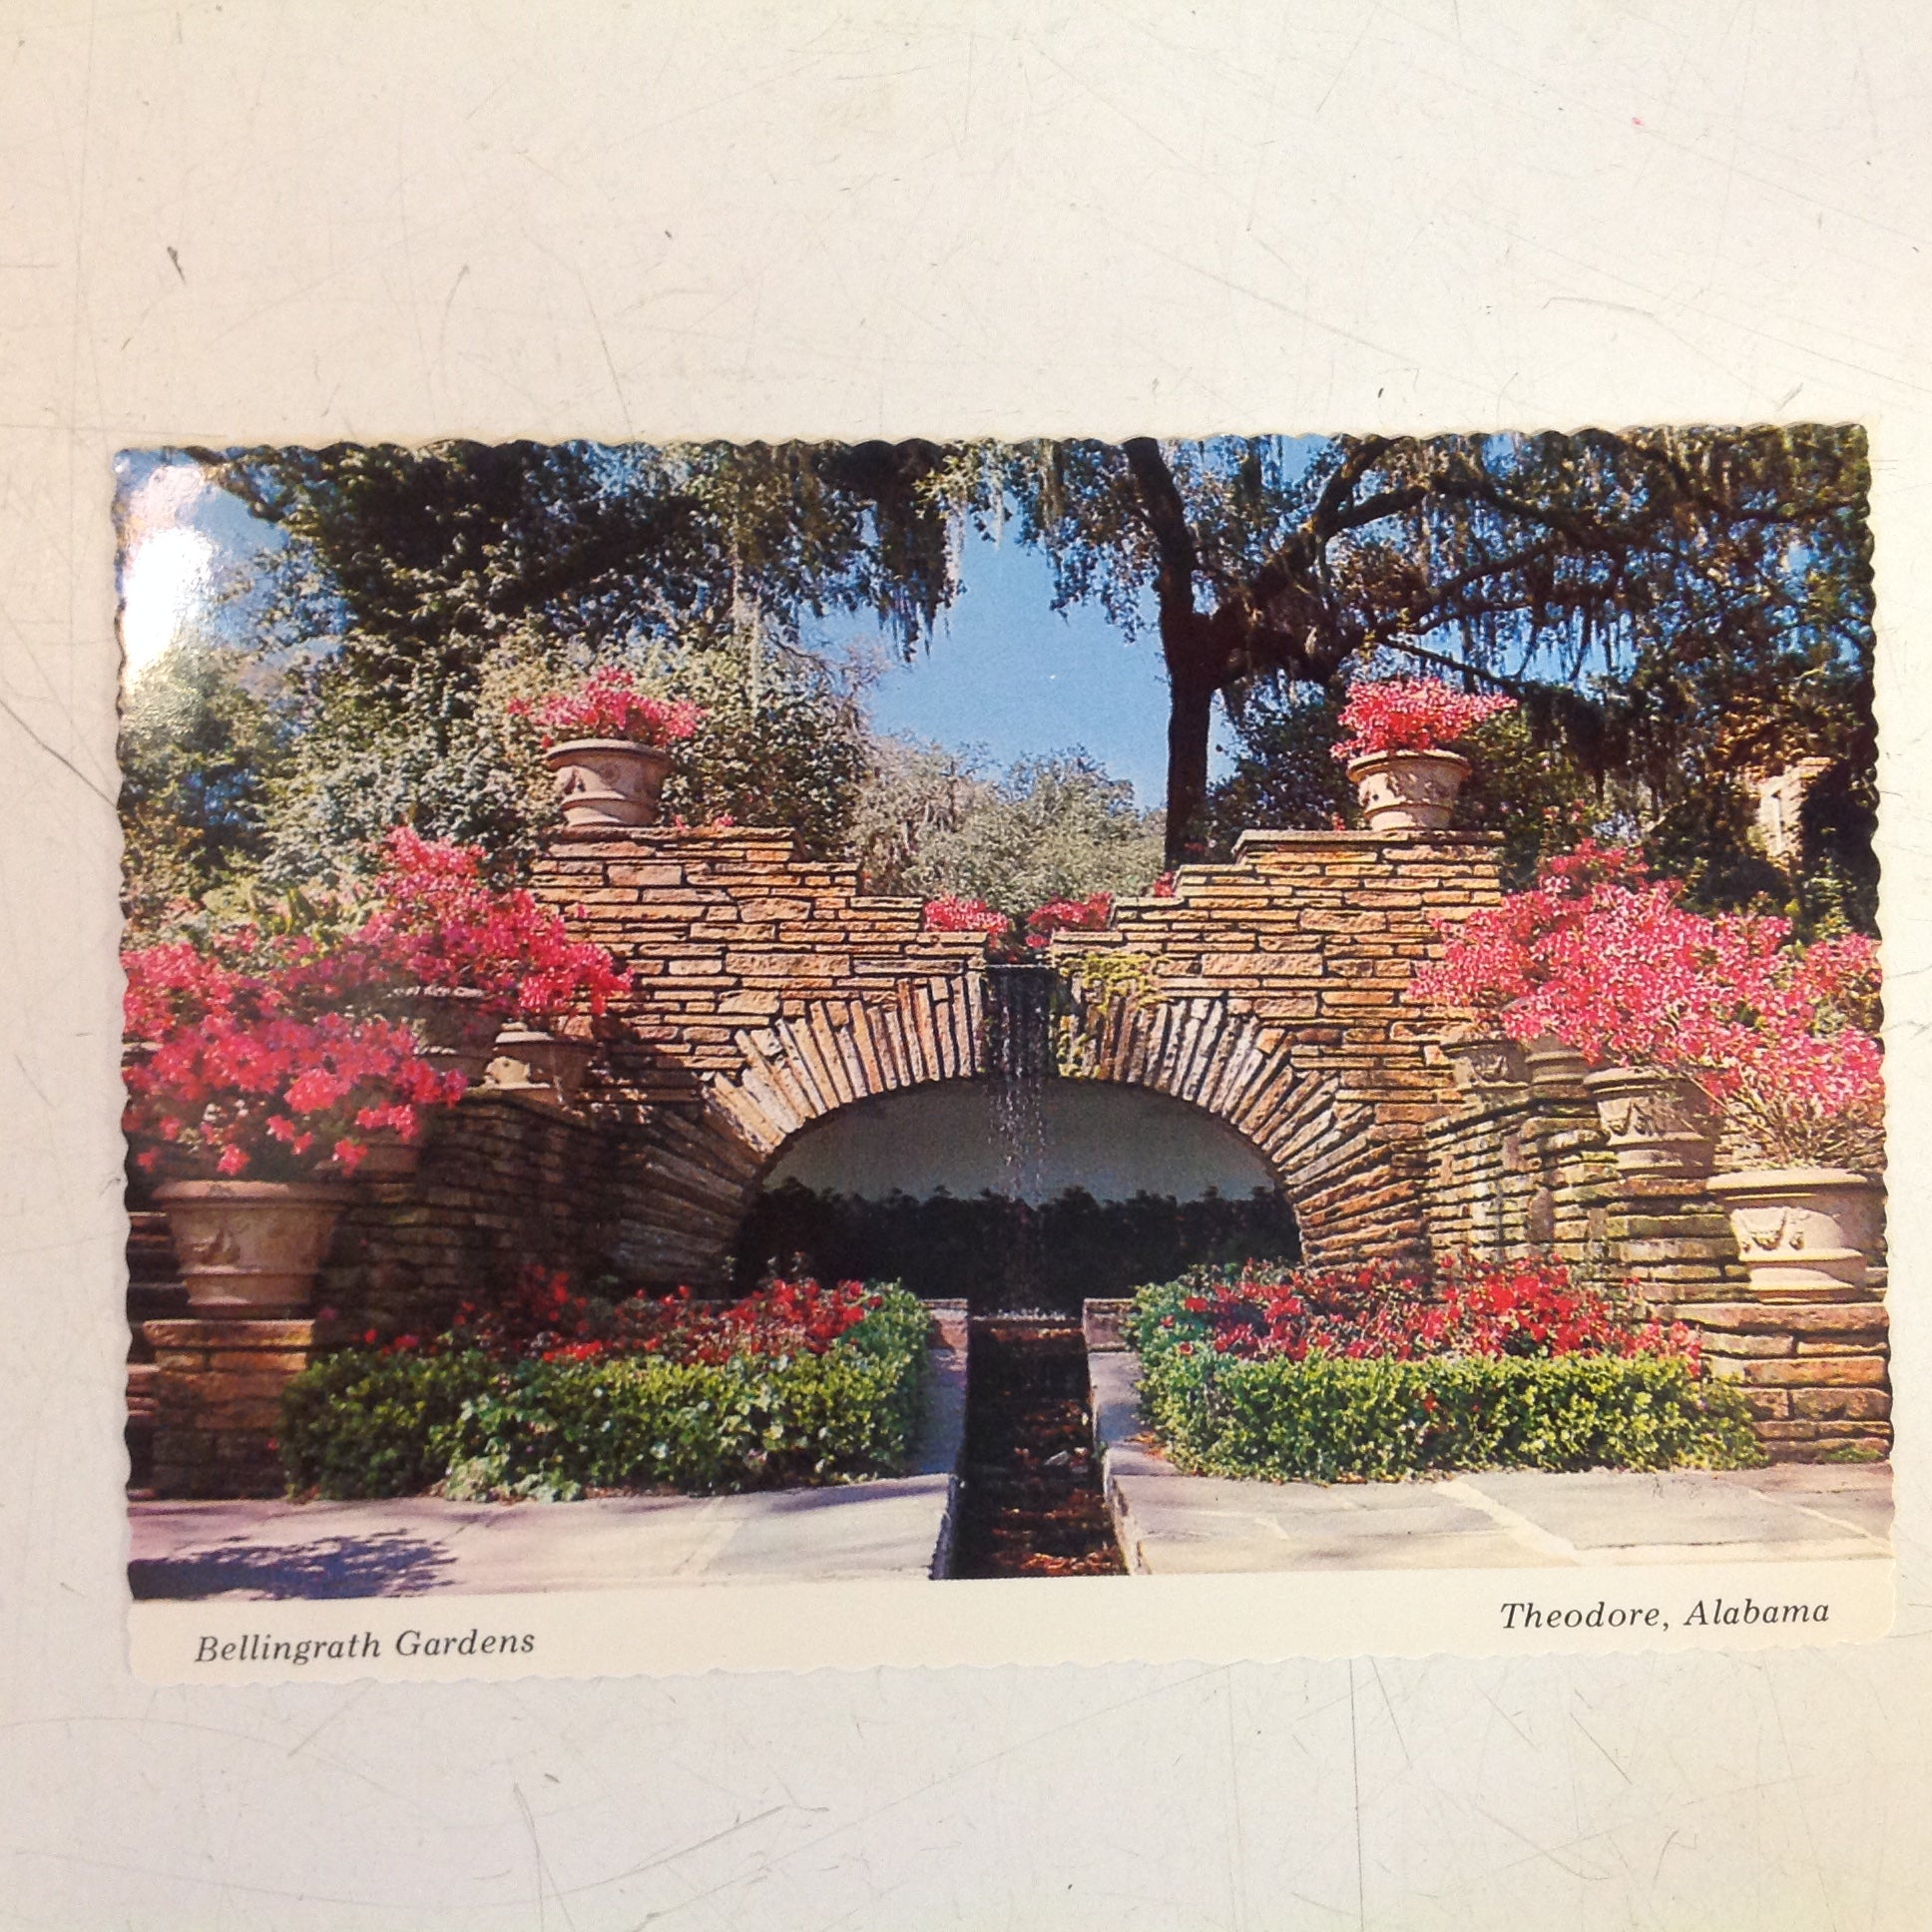 Vintage Scalloped Edged Color Postcard Bellingrath Home and Gardens The Grotto Isles-aux-oies Theodore Alabama